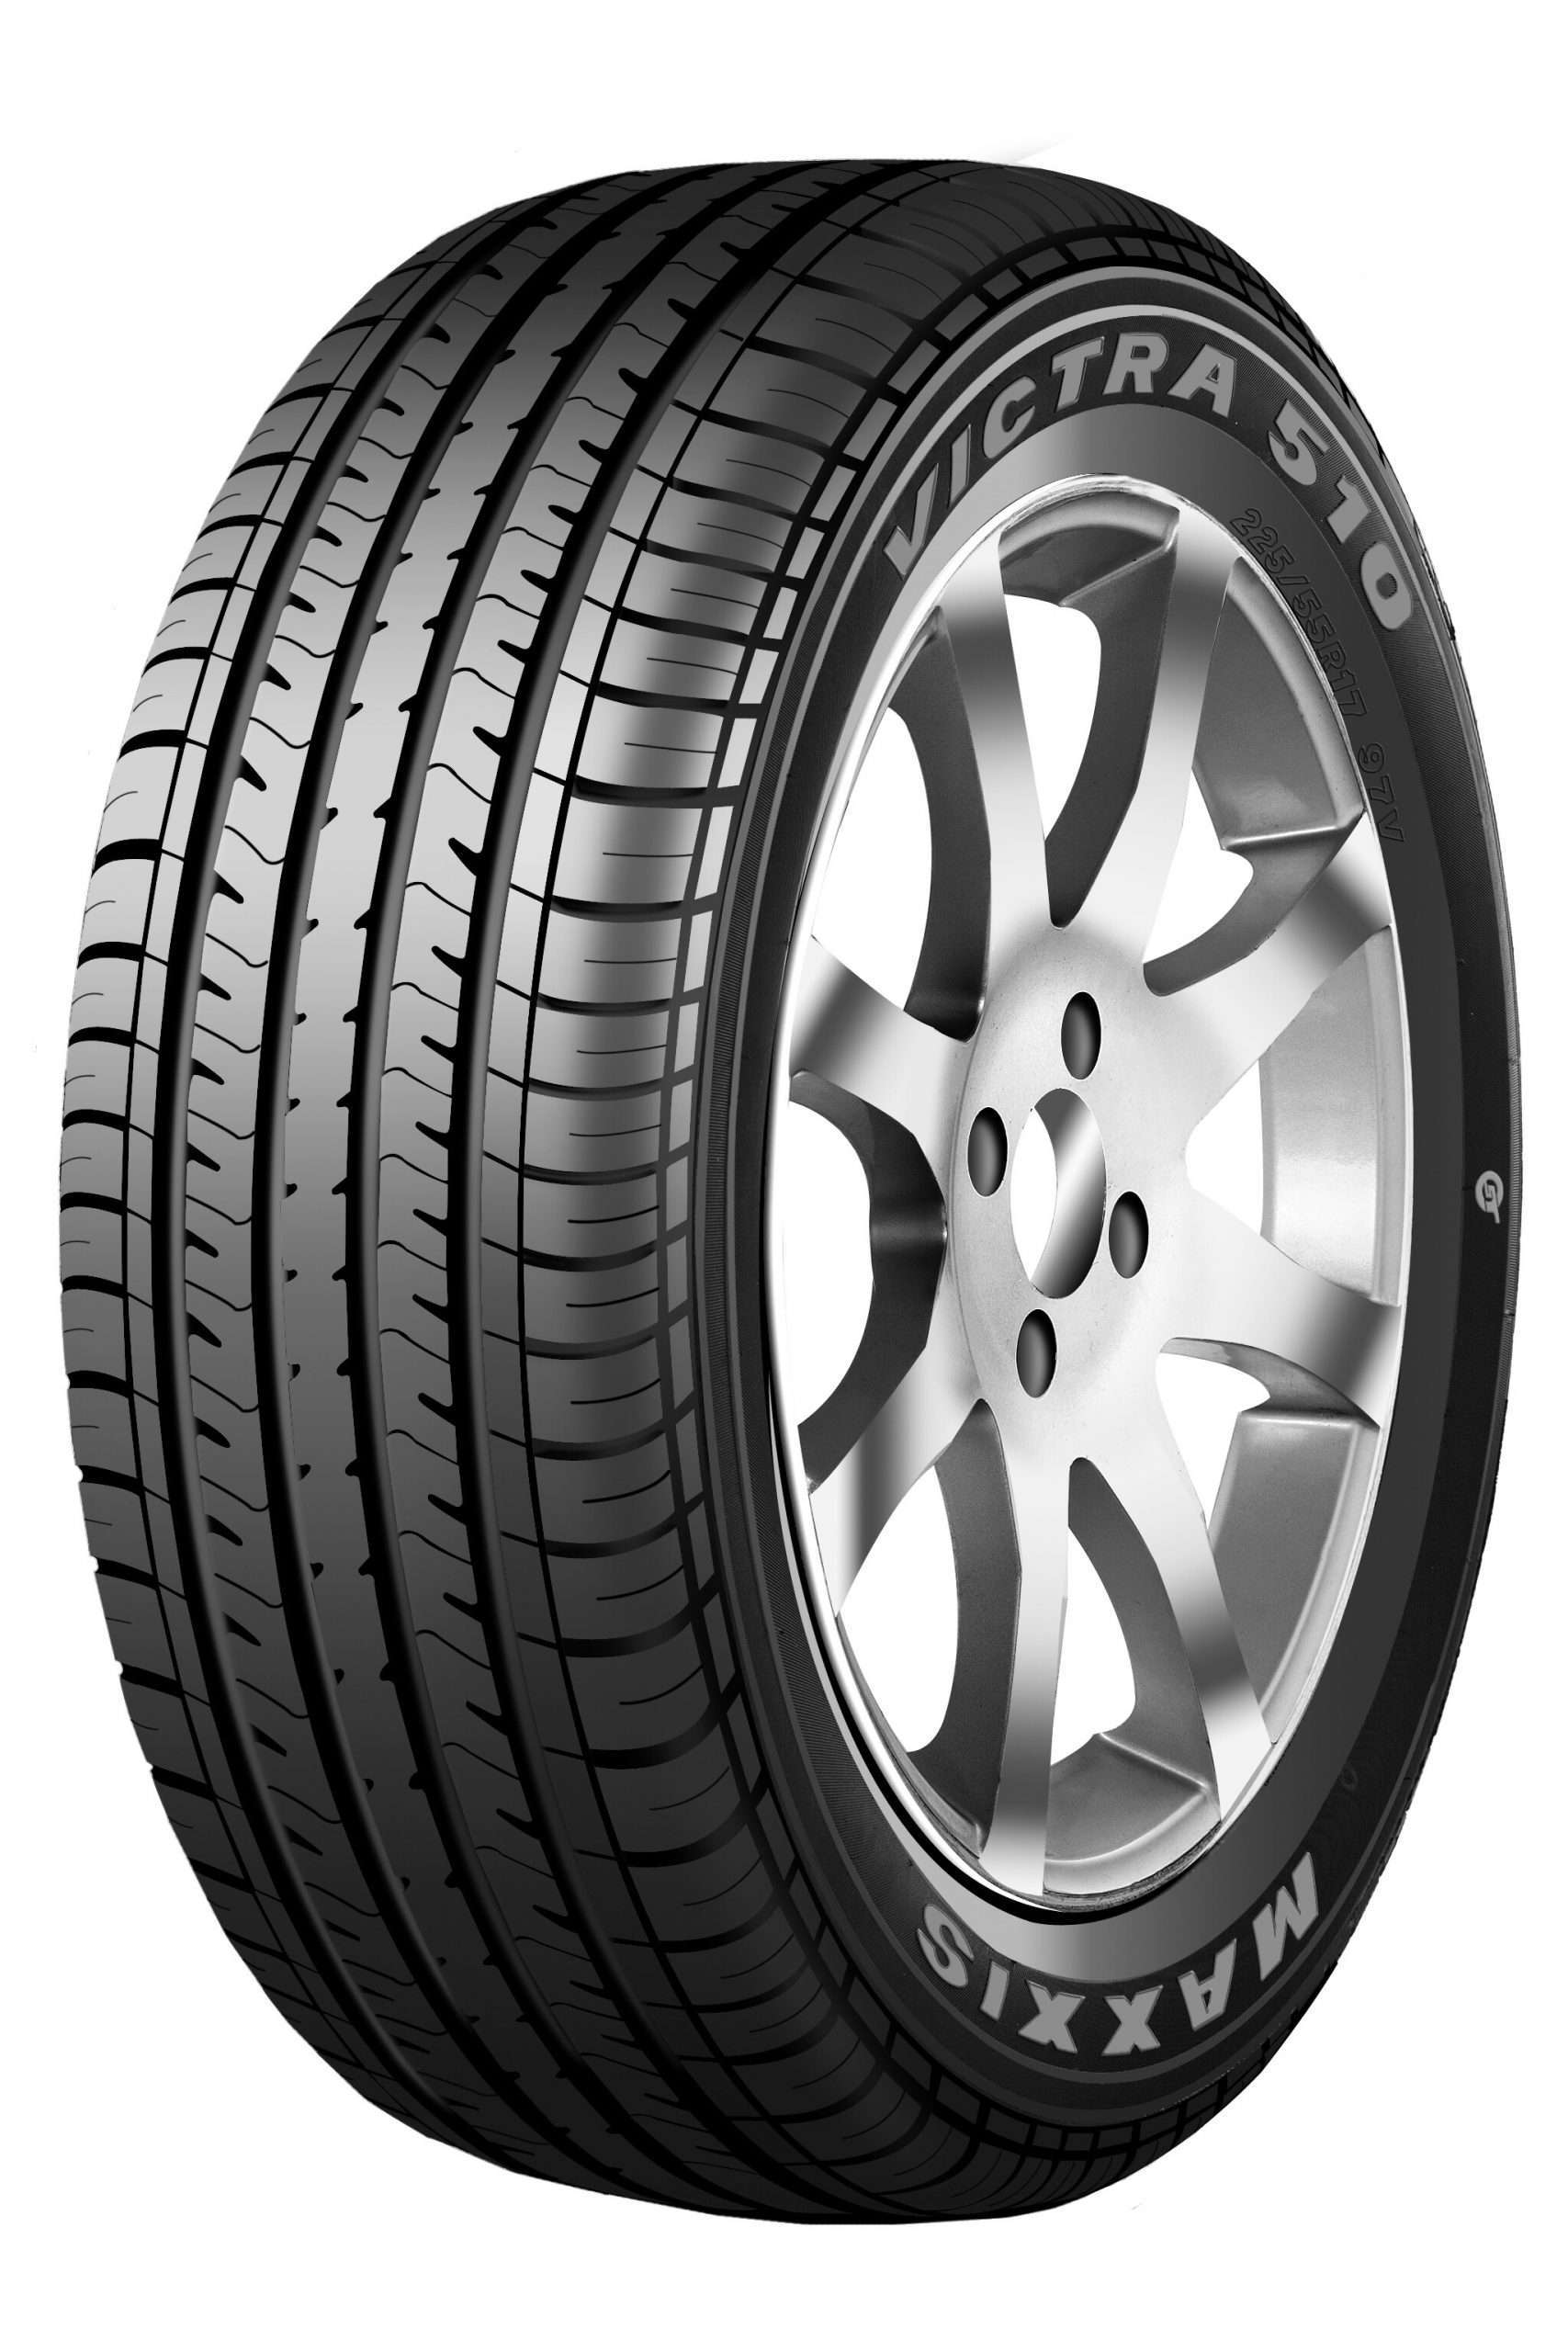 Шины максис виктра. Maxxis ma-510 Victra. Maxxis Victra 510. Maxxis шины r15 Victra. Резина Maxxis r16 Victra.